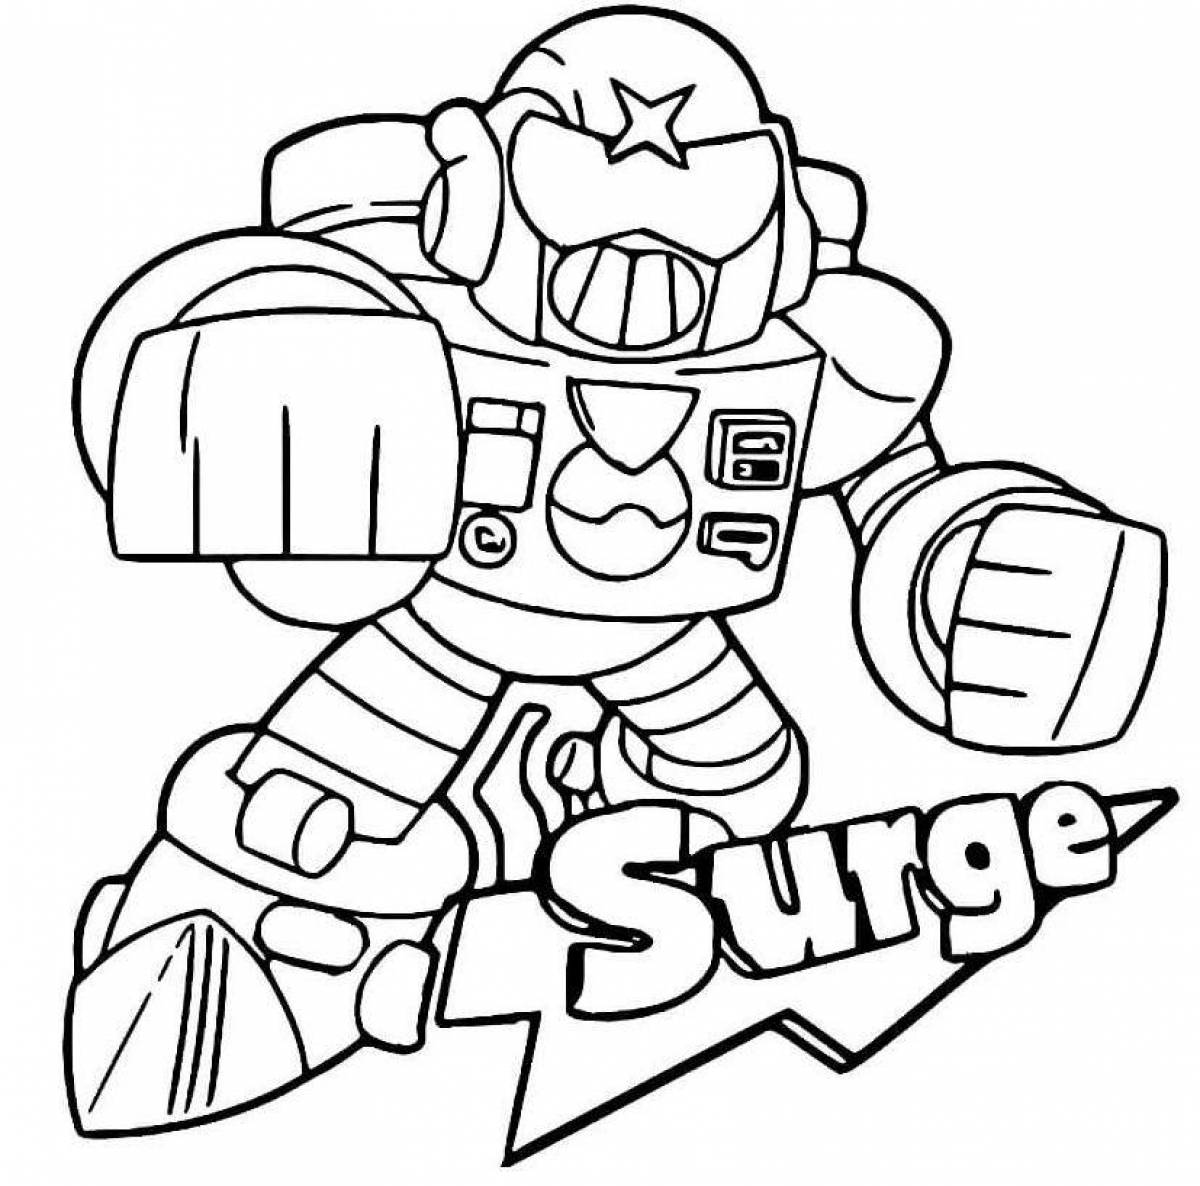 Buster brawl stars animated coloring page